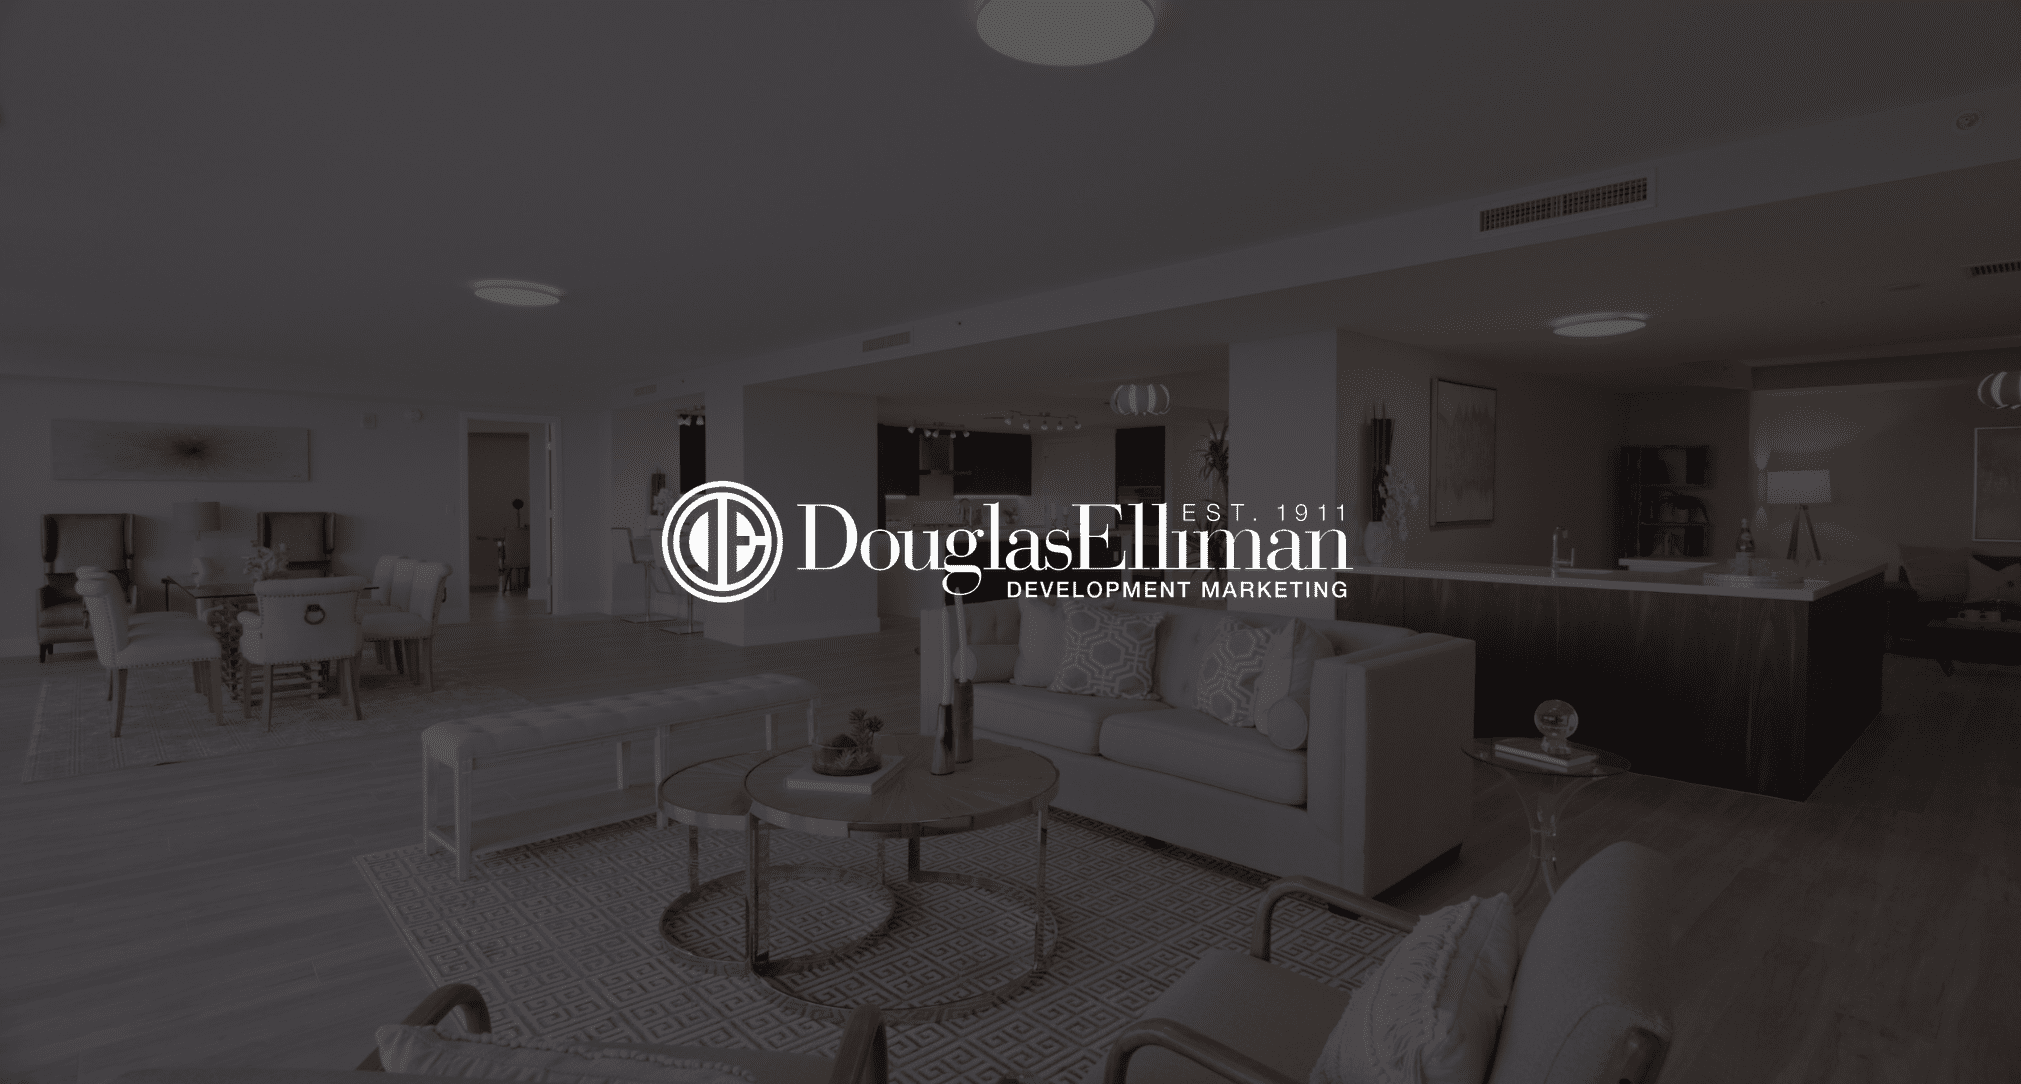 White Douglas Elliman Development Marketing logo Featured Image with black and white background of furniture in a living room and dining room of a house